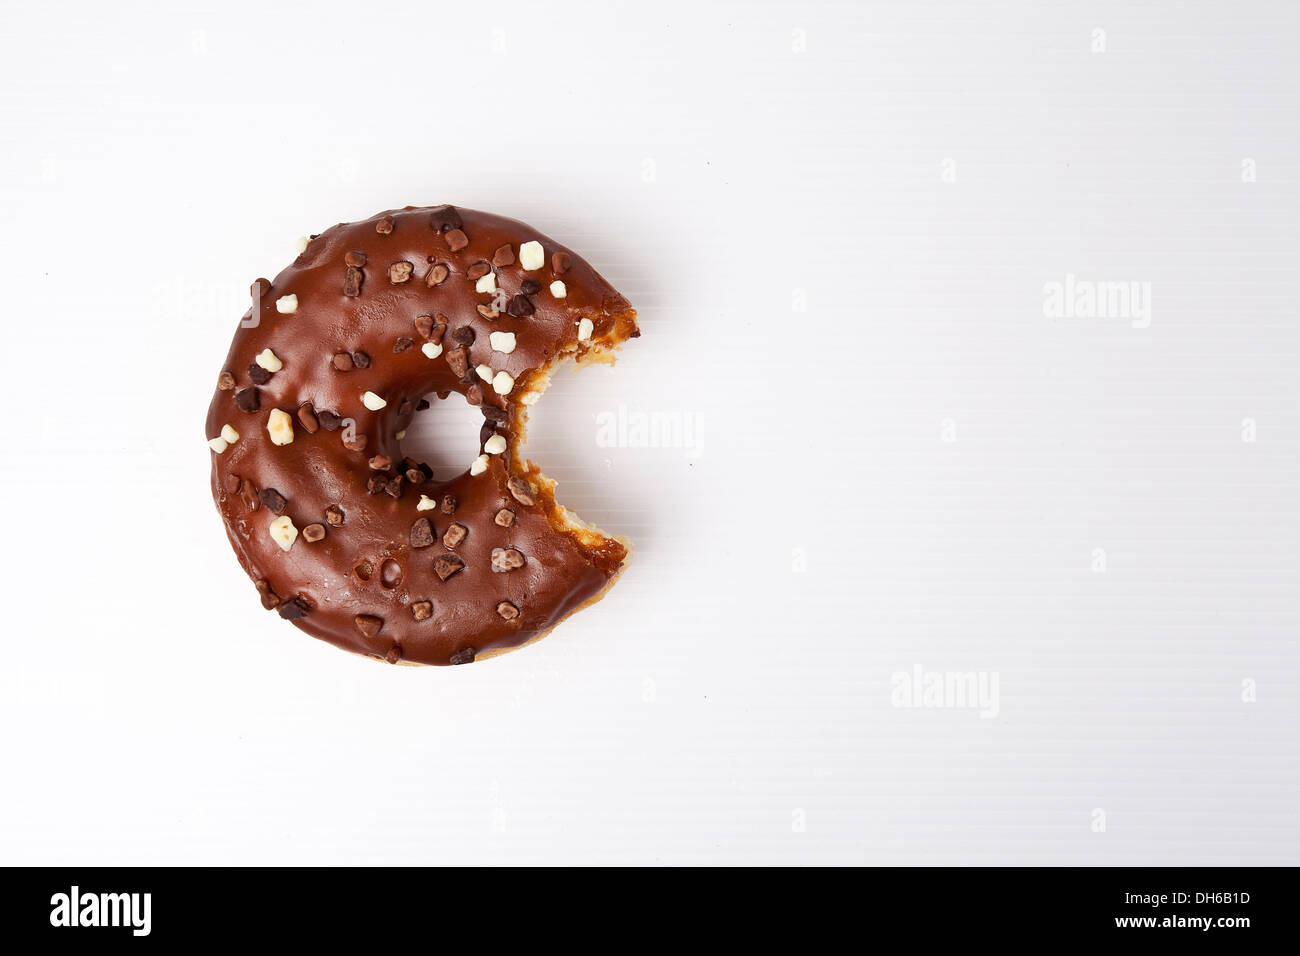 Frosted glazed Donut with chocolate sprinkles Stock Photo